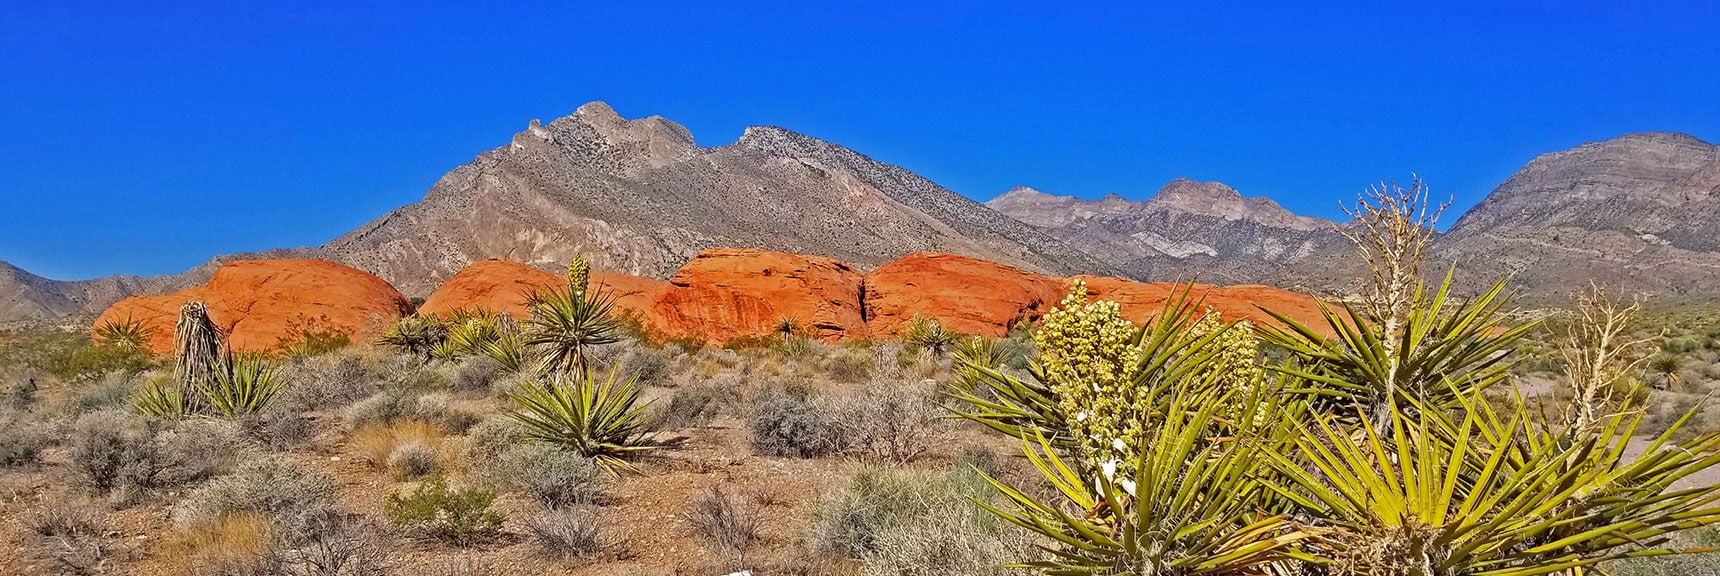 Continuing Toward Base of Damsel Peak, Another Group of Red Rock Formations | Little Red Rock Las Vegas, Nevada, Near La Madre Mountains Wilderness